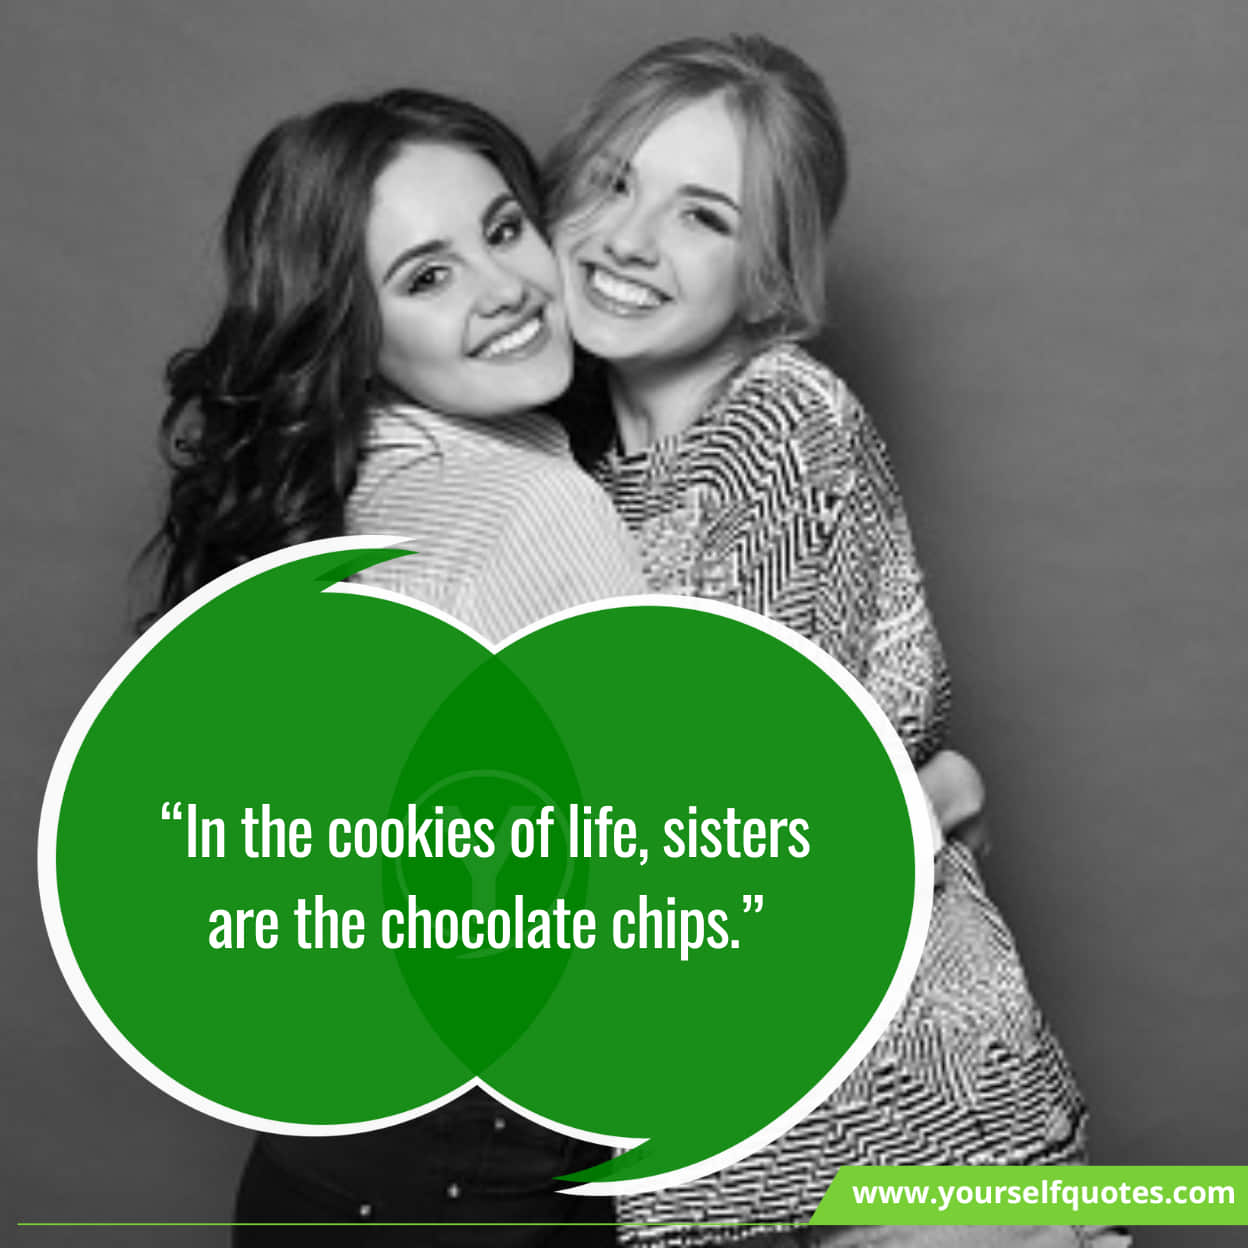 Famous Quotes About Sisters